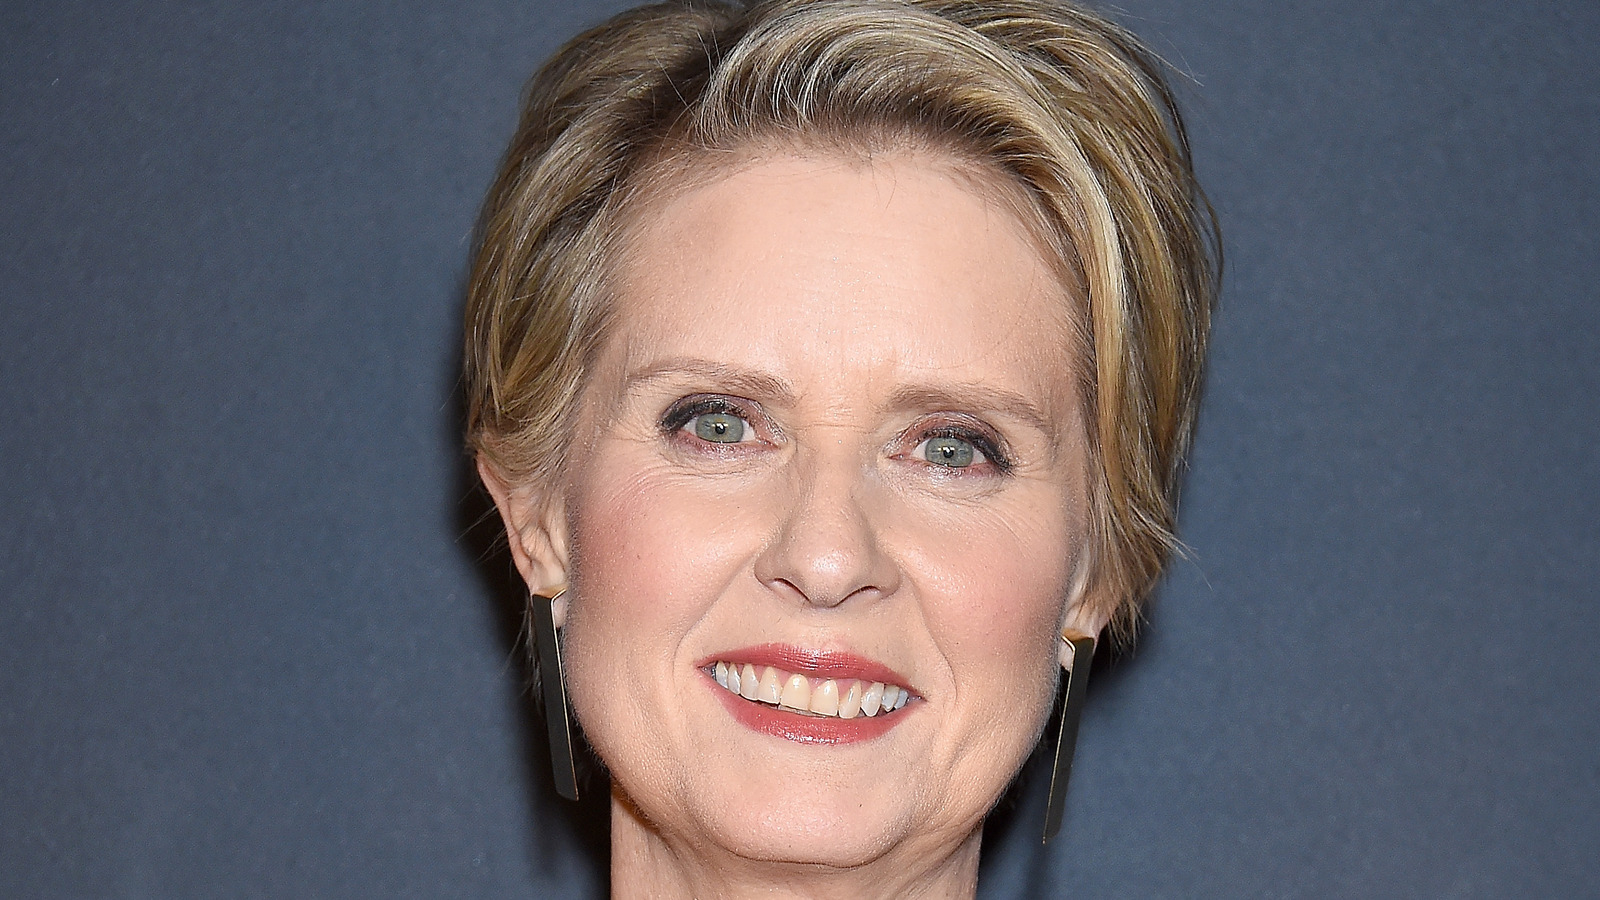 Cynthia Nixon's Net Worth: How Much Is The Famous Actress Worth?